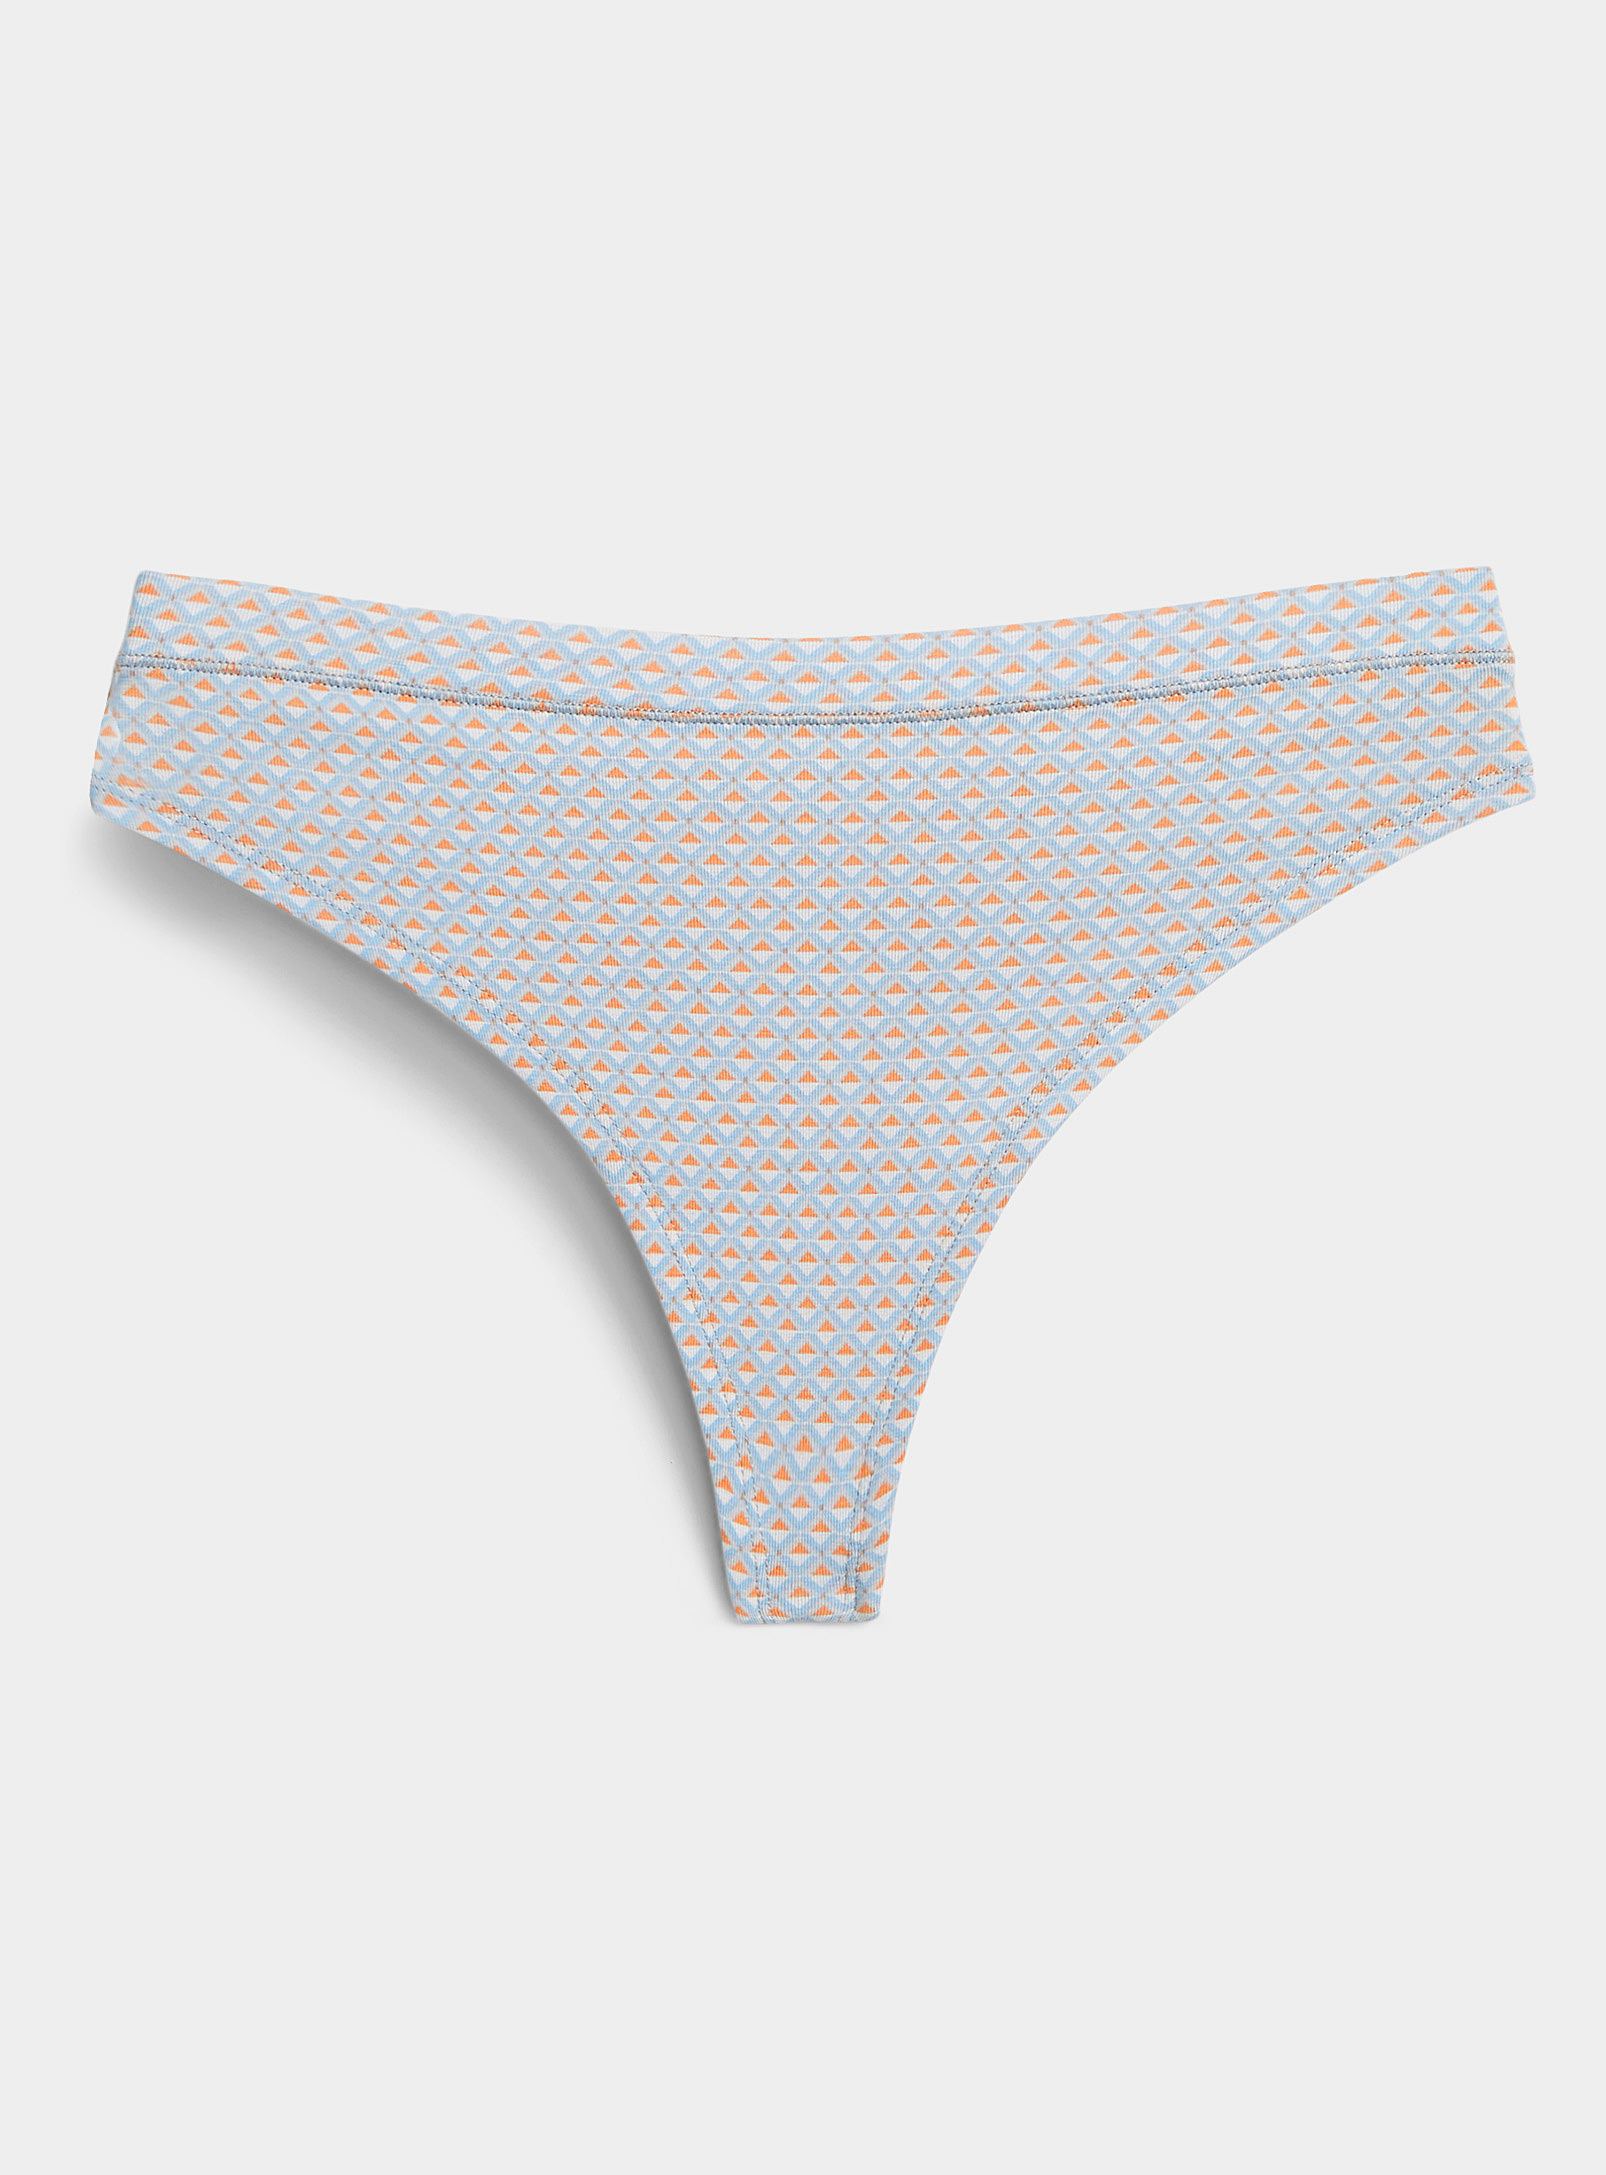 Miiyu Colourful Organic Cotton And Modal Thong In Patterned Orange